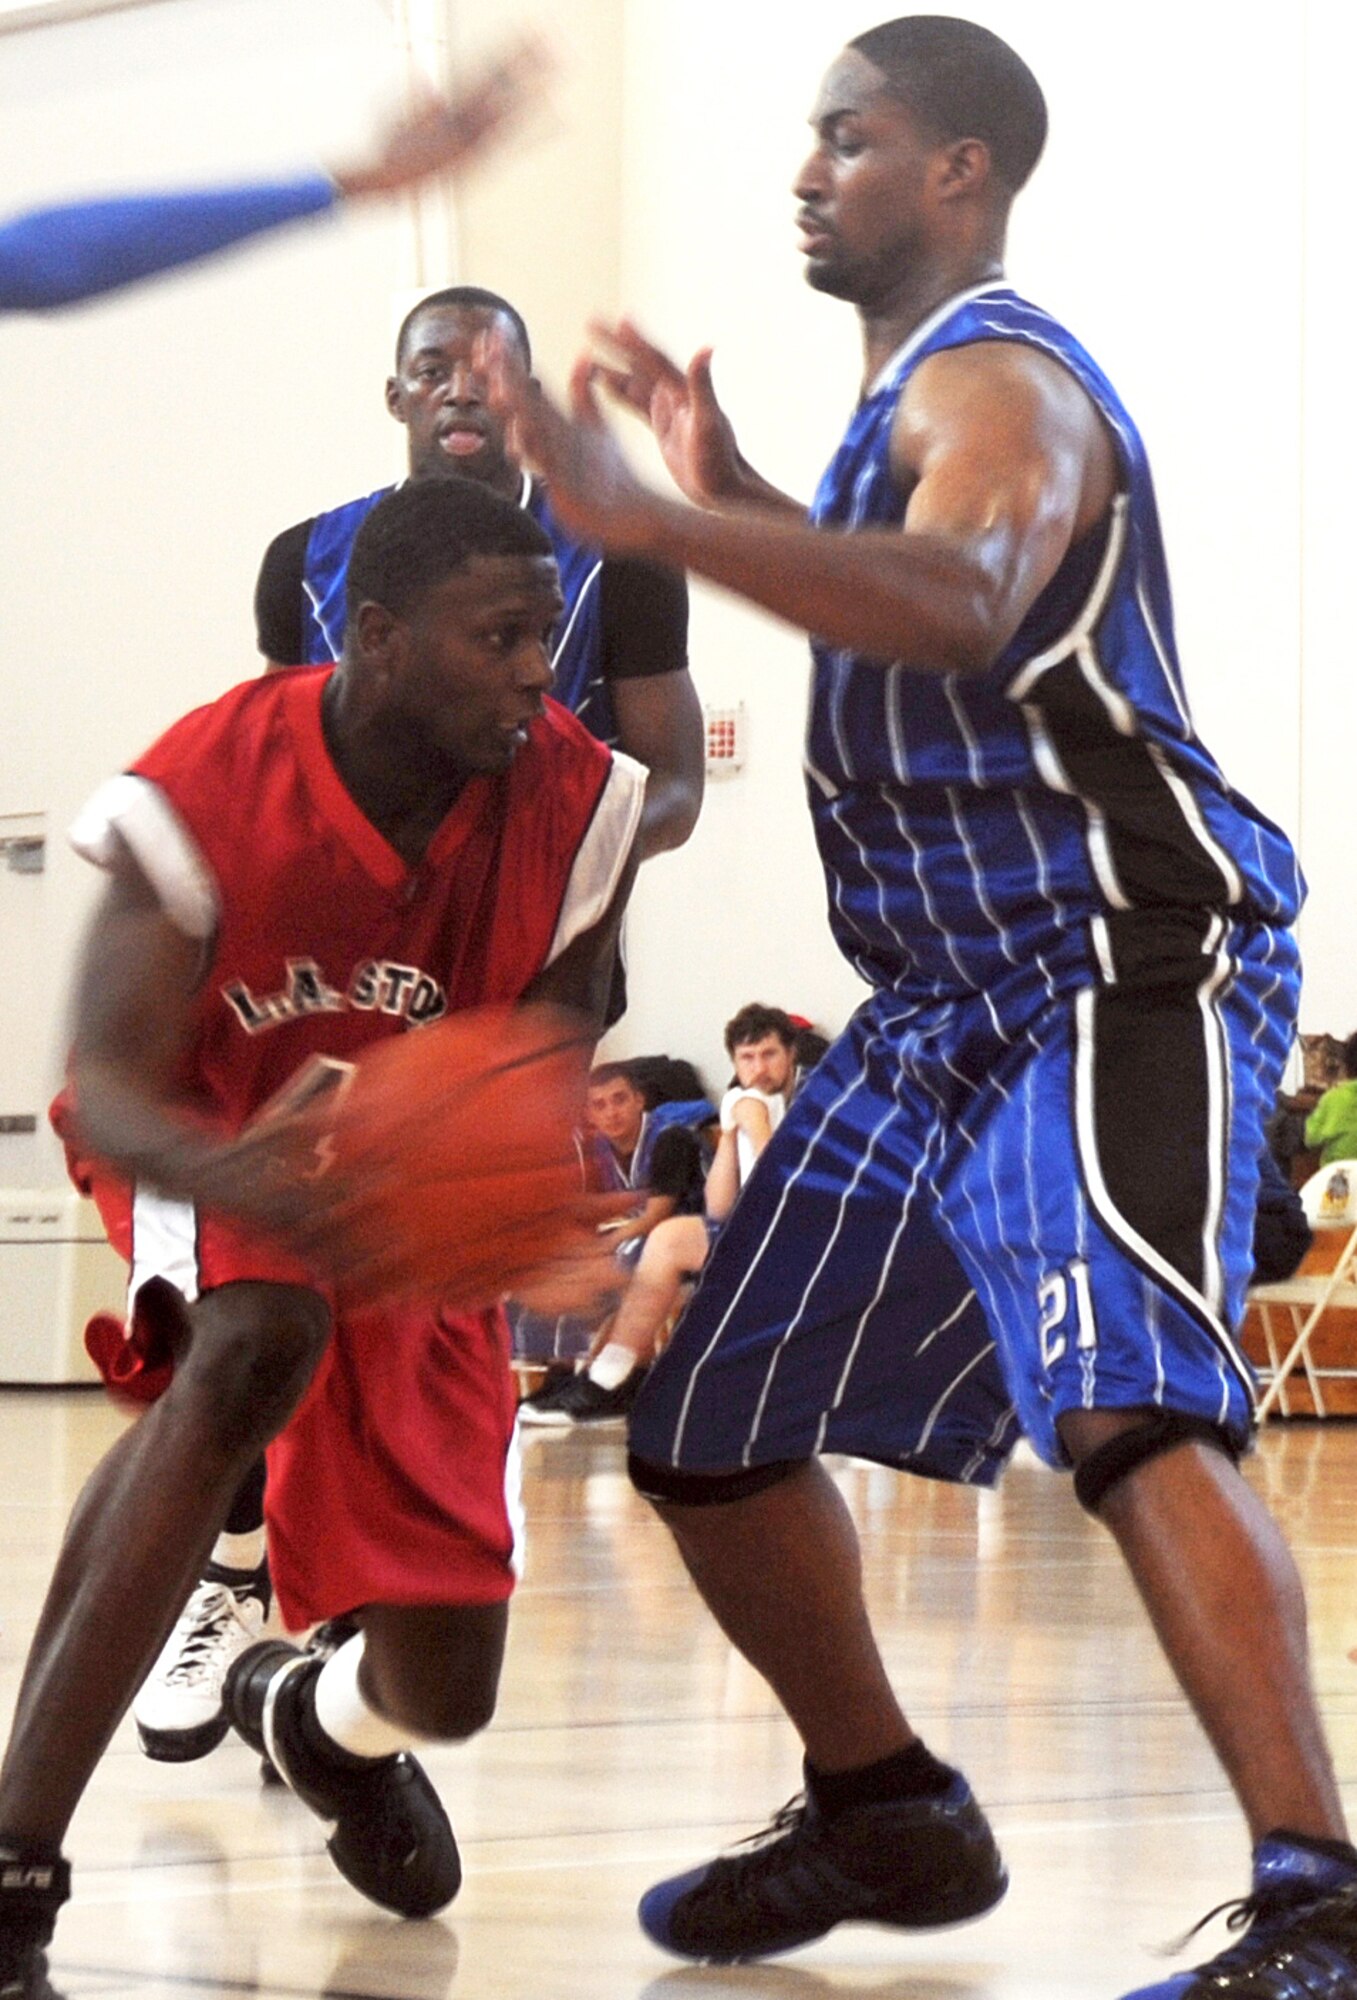 Airman First Class Caleb Chandler (left), 61st Medical Group, drives the lane against defenders from Travis Air Force Base during the championship final game. Los Angeles AFB sponsored the 2009 Veterans Day "SoCal Shootout" Basketball Tournament on Nov. 7 and 8, which included participation from Luke AFB, Travis AFB, Vandenberg AFB, and Edwards AFB. The LA Storm won the championship title with an 80 to 77 victory over Travis. (Photo by Atiba Copeland)